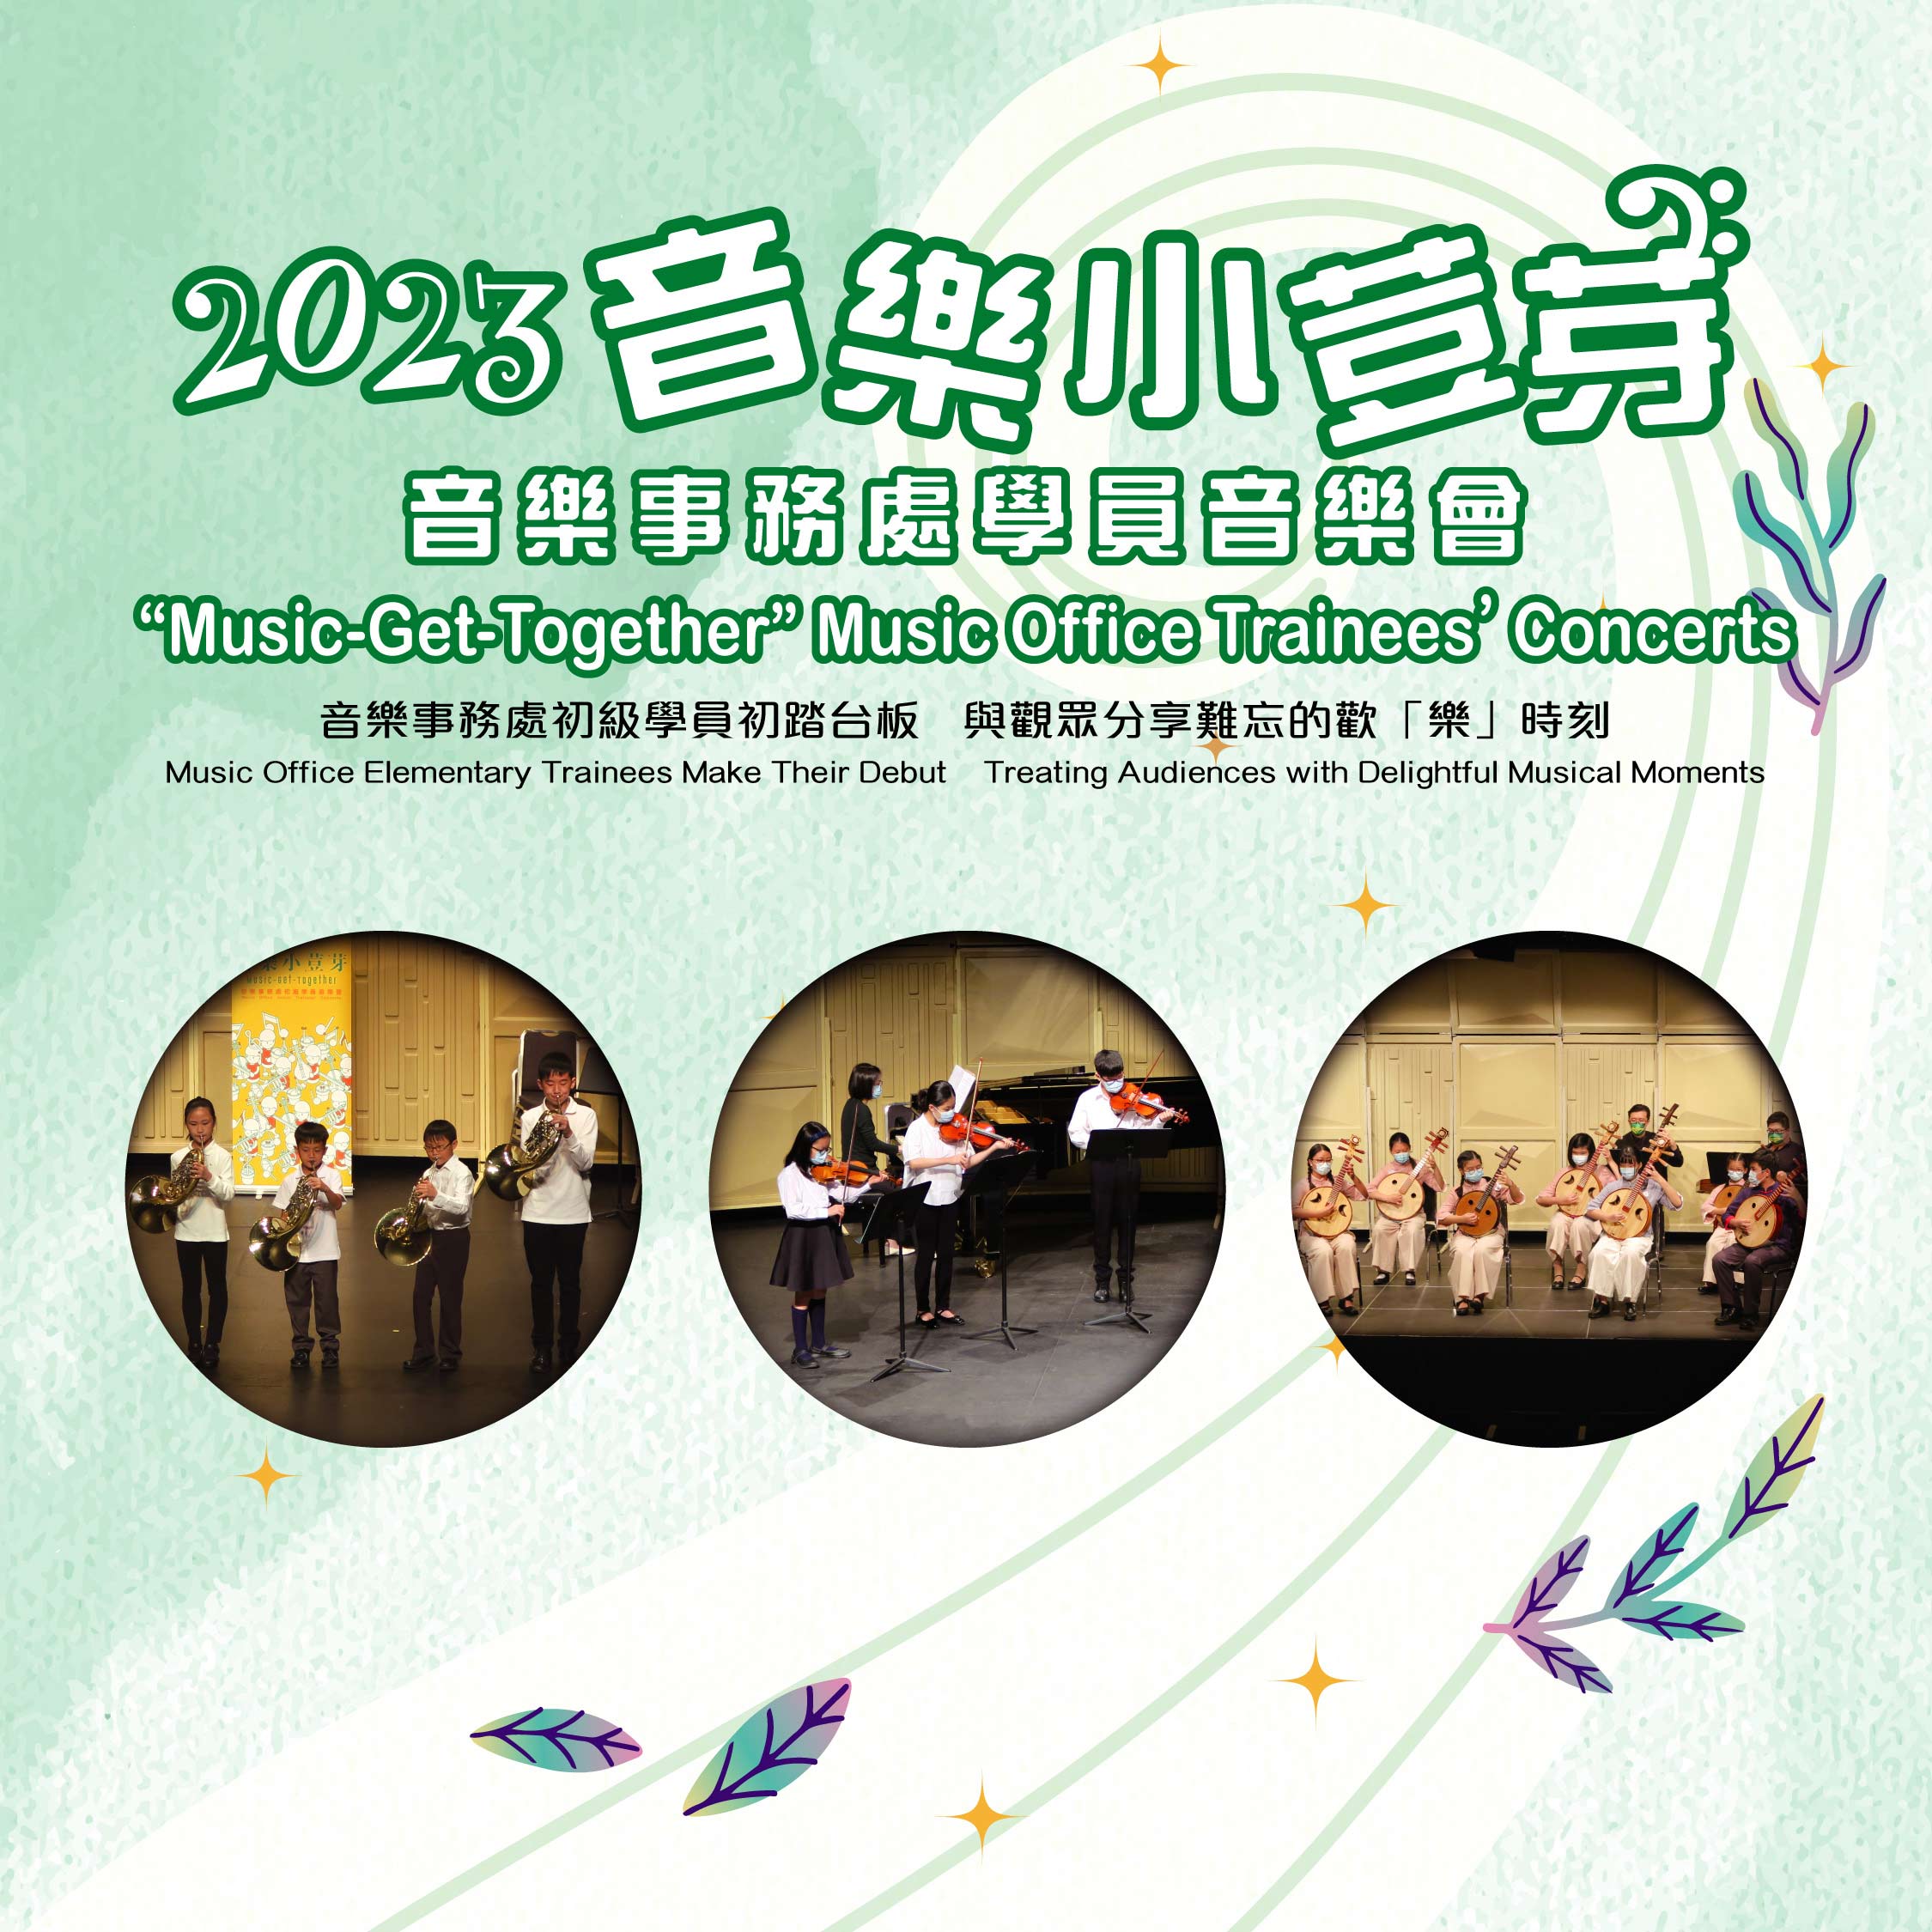 2023"Music-Get-Together" Music Office Trainees' Concerts